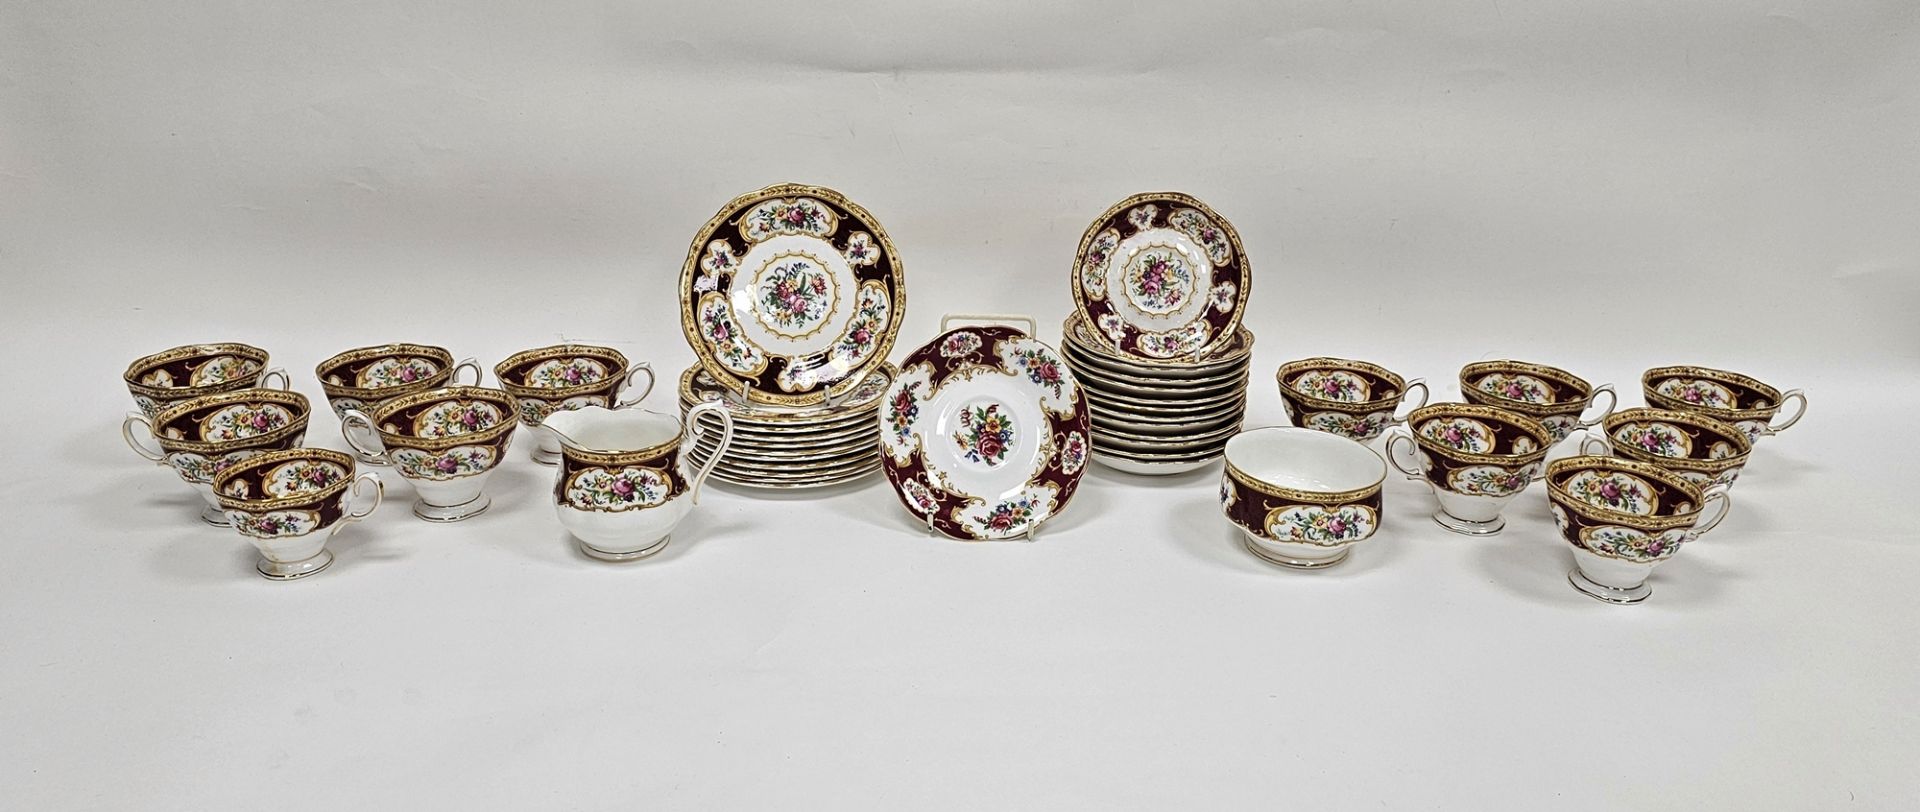 Royal Albert 'Lady Hamilton' pattern bone china part tea service including teacups and saucers, side